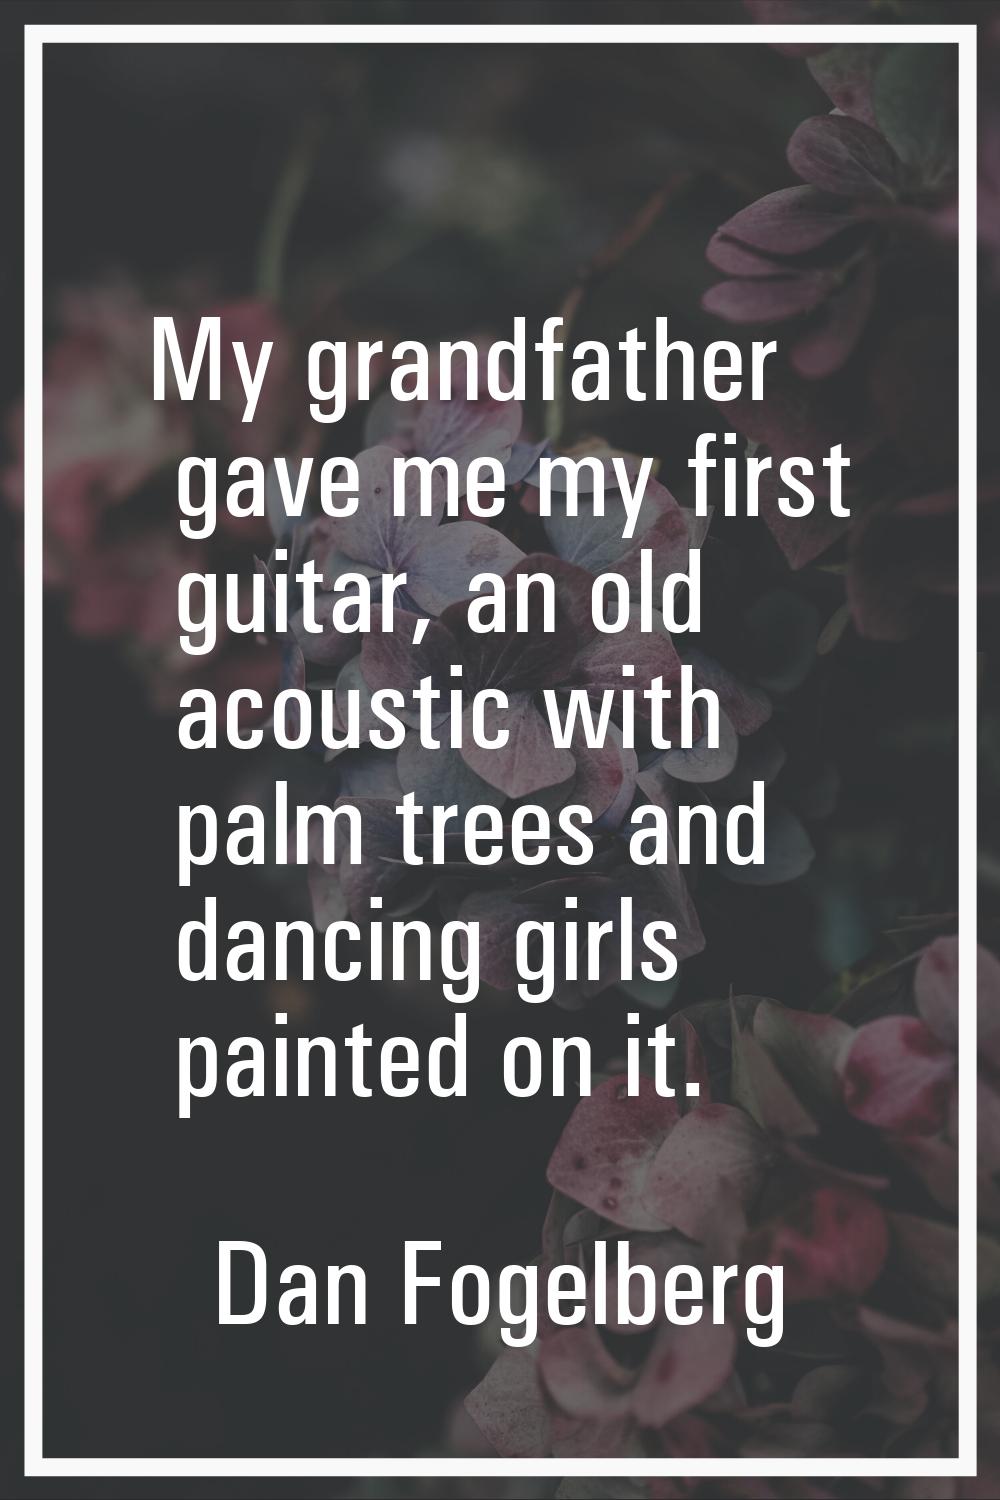 My grandfather gave me my first guitar, an old acoustic with palm trees and dancing girls painted o